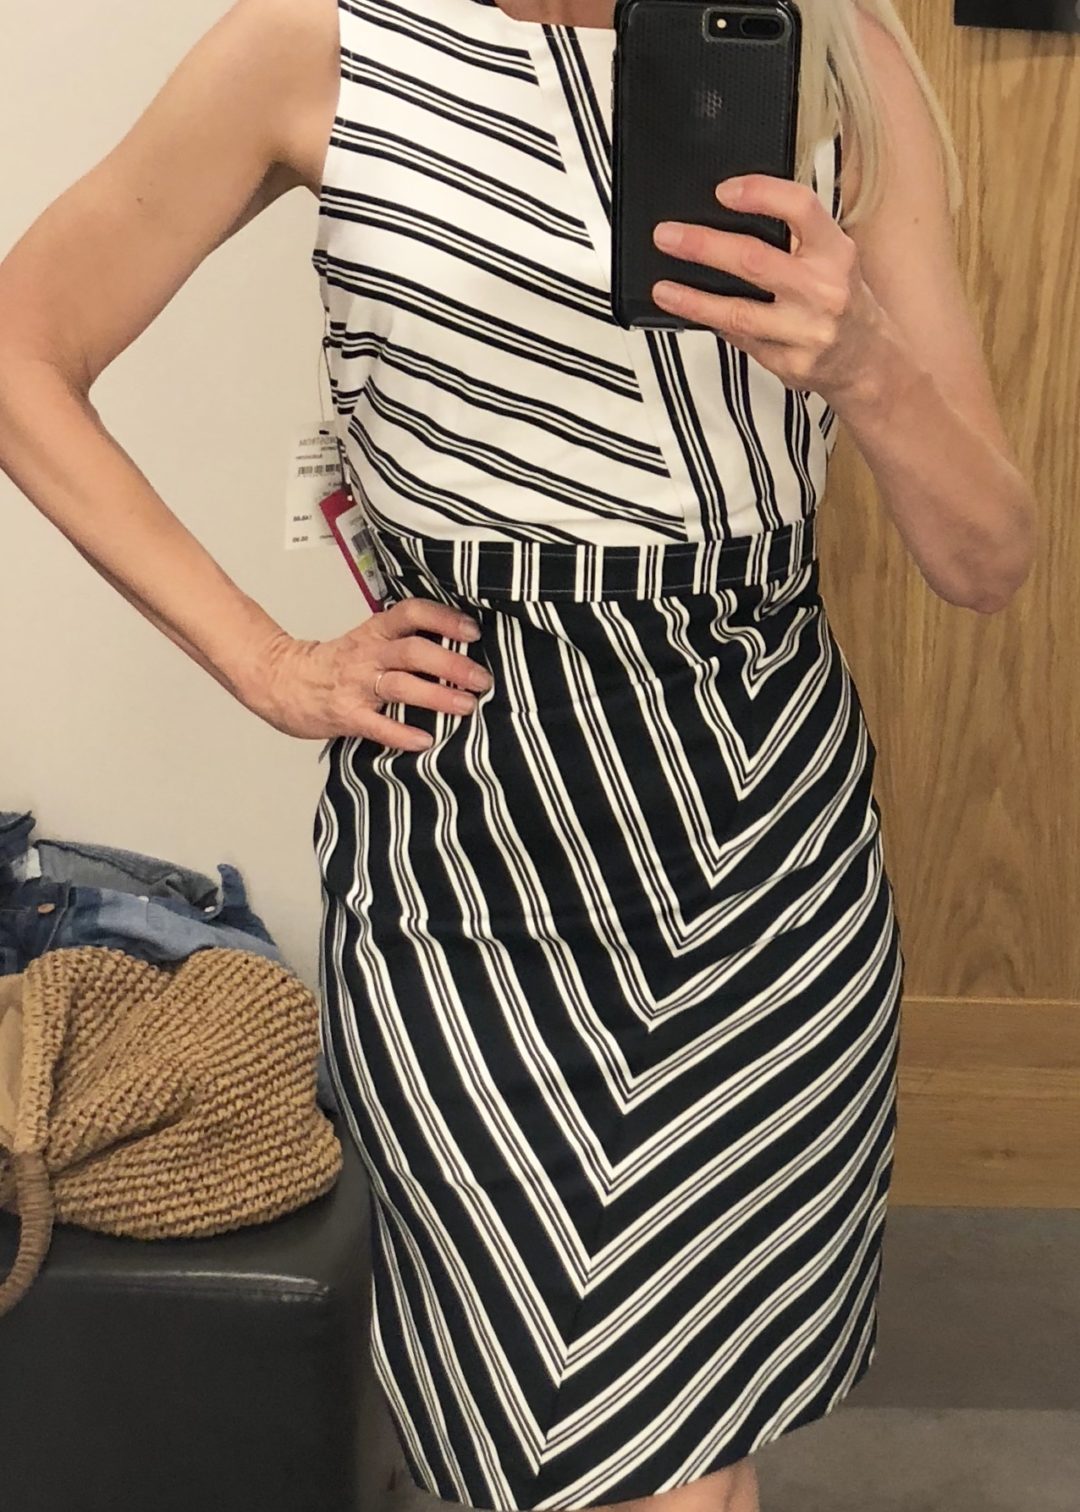 Nordstrom Anniversary Sale Dressing Room Selfies 2018! - Fashion Should ...